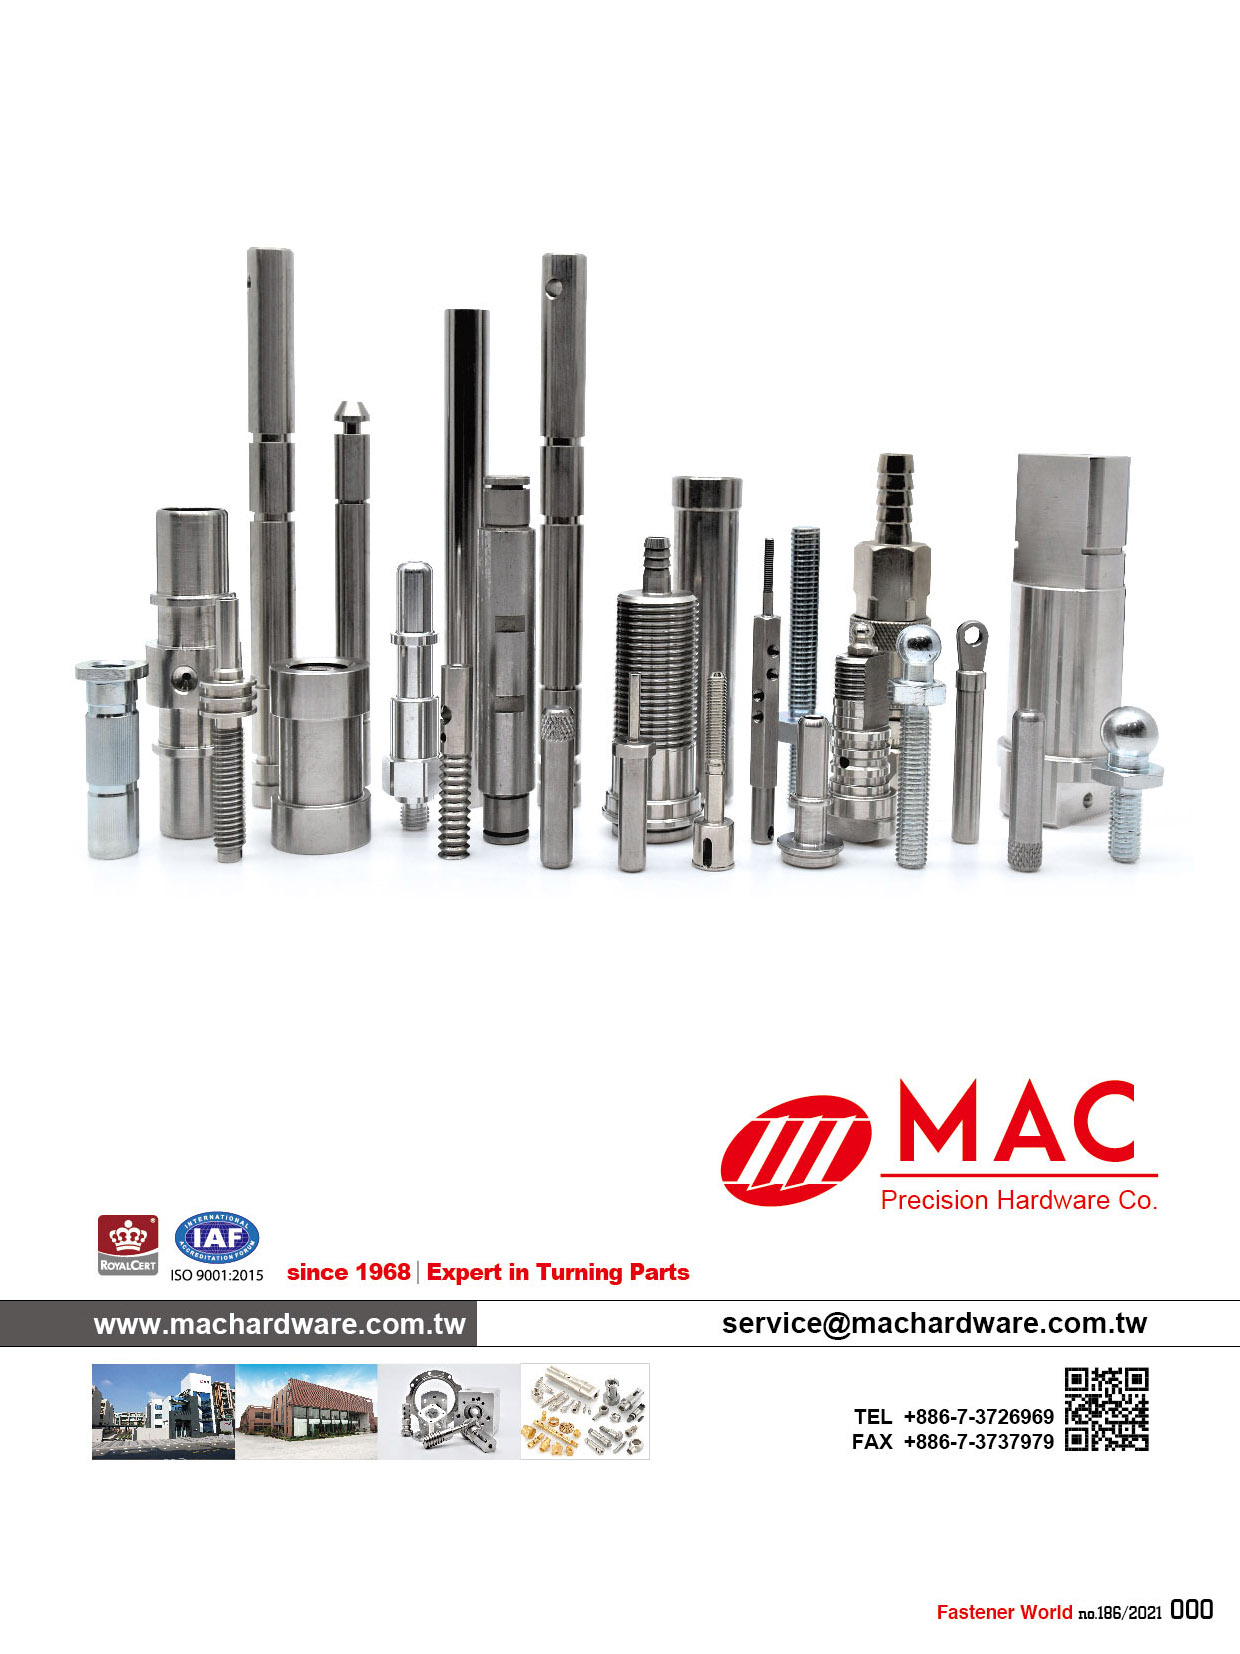 MAC PRECISION HARDWARE CO. , Precision Turning Parts,Locking Beads,Assembly Parts,Cold/Hot Forging Parts,Extrusion Parts,Bolt-nut,Precision Shaft Parts,Hydraulic Fitting,Die Casting Parts,Pipe Joint,Stamping Parts,Lock Accessories,Plastic Injection Parts,Valve rod/Valve element , Turning Parts